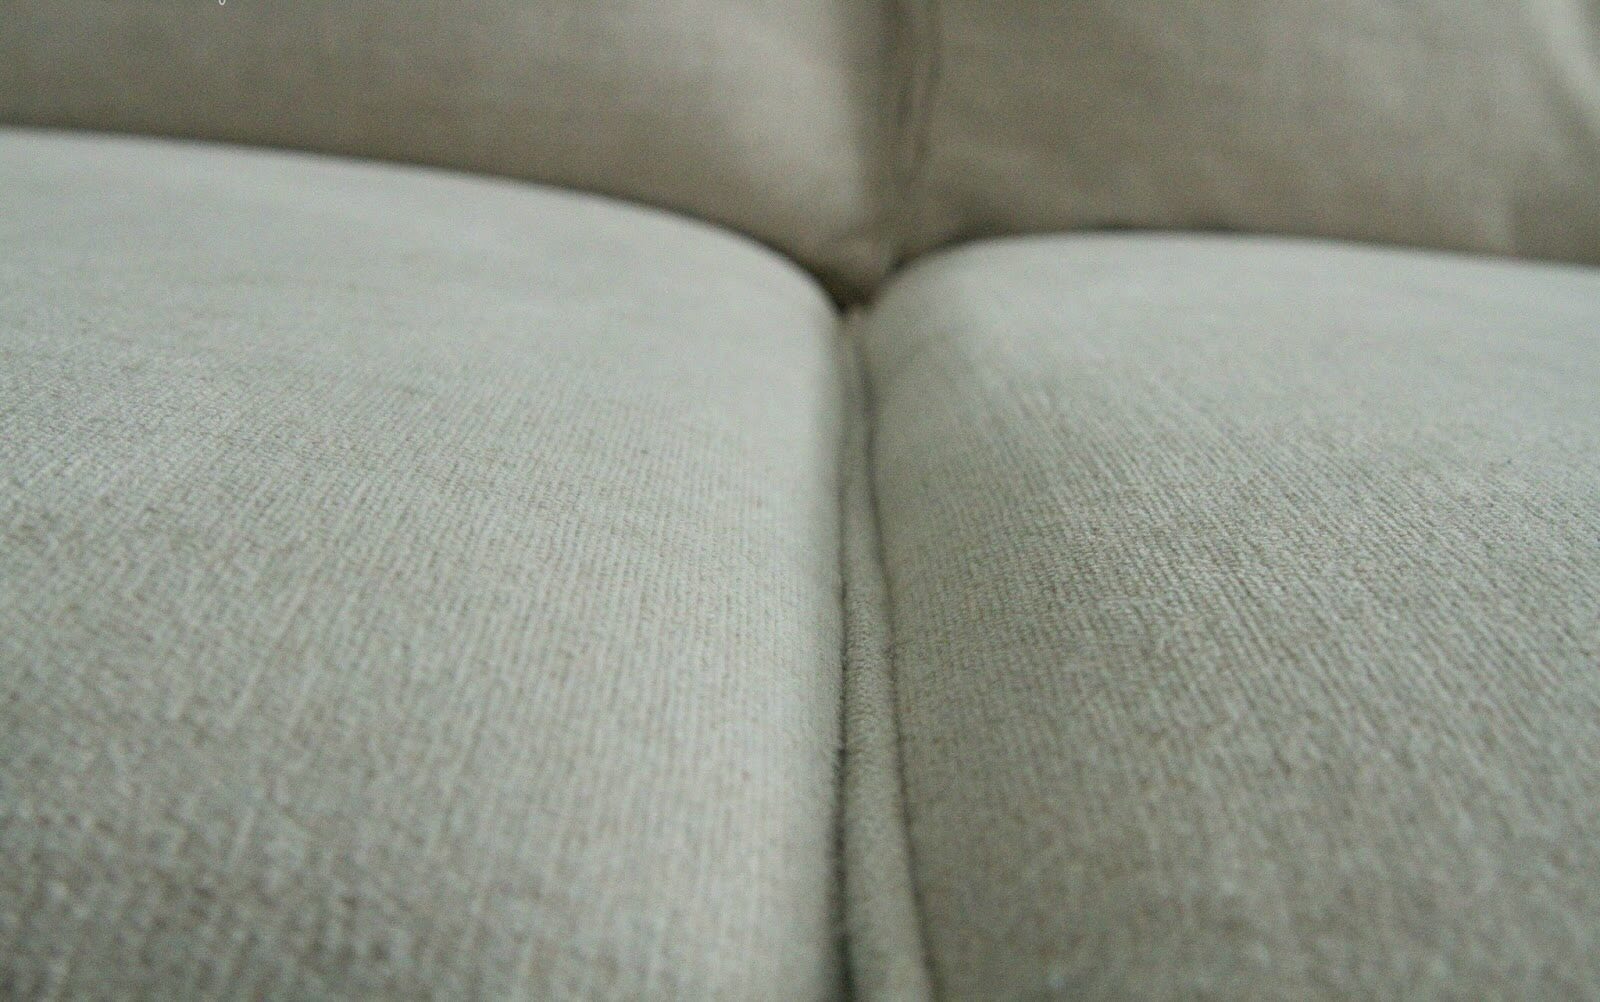 How To Get Fuzz Off Couch Cushions